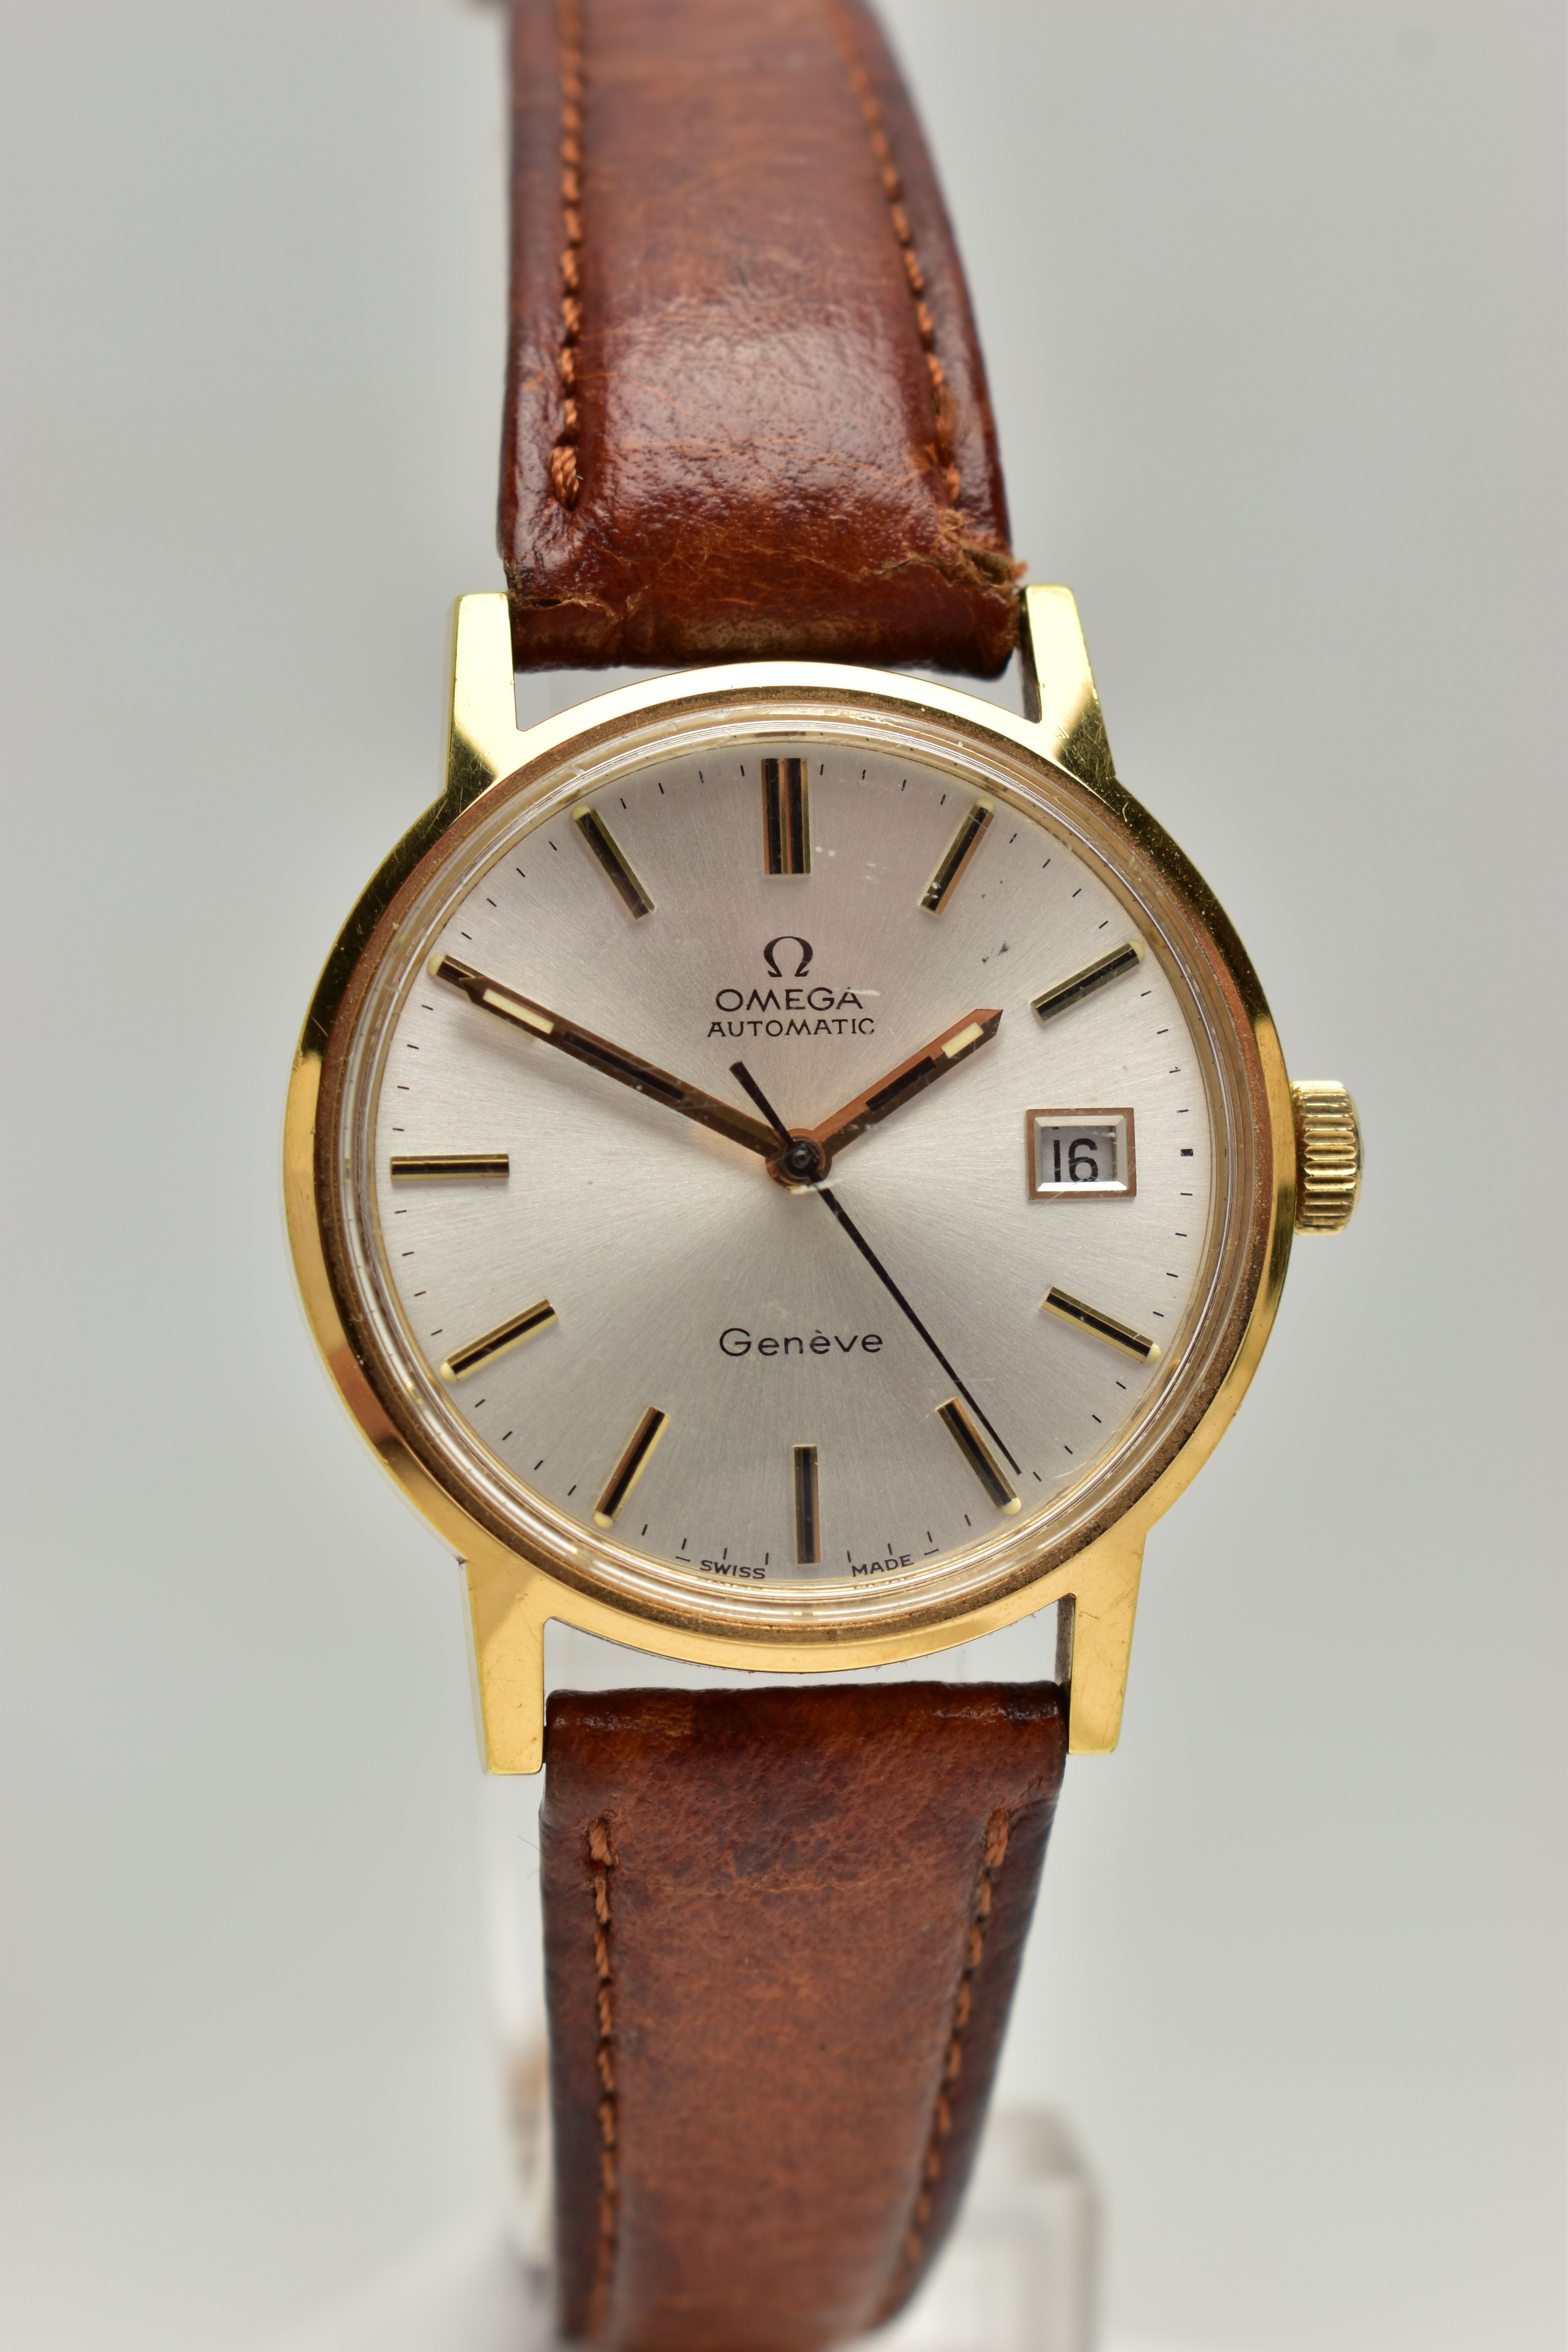 A GENTS 'OMEGA AUTOMATIC' WRISTWATCH, round silver dial signed 'Omega Automatic Geneve', baton